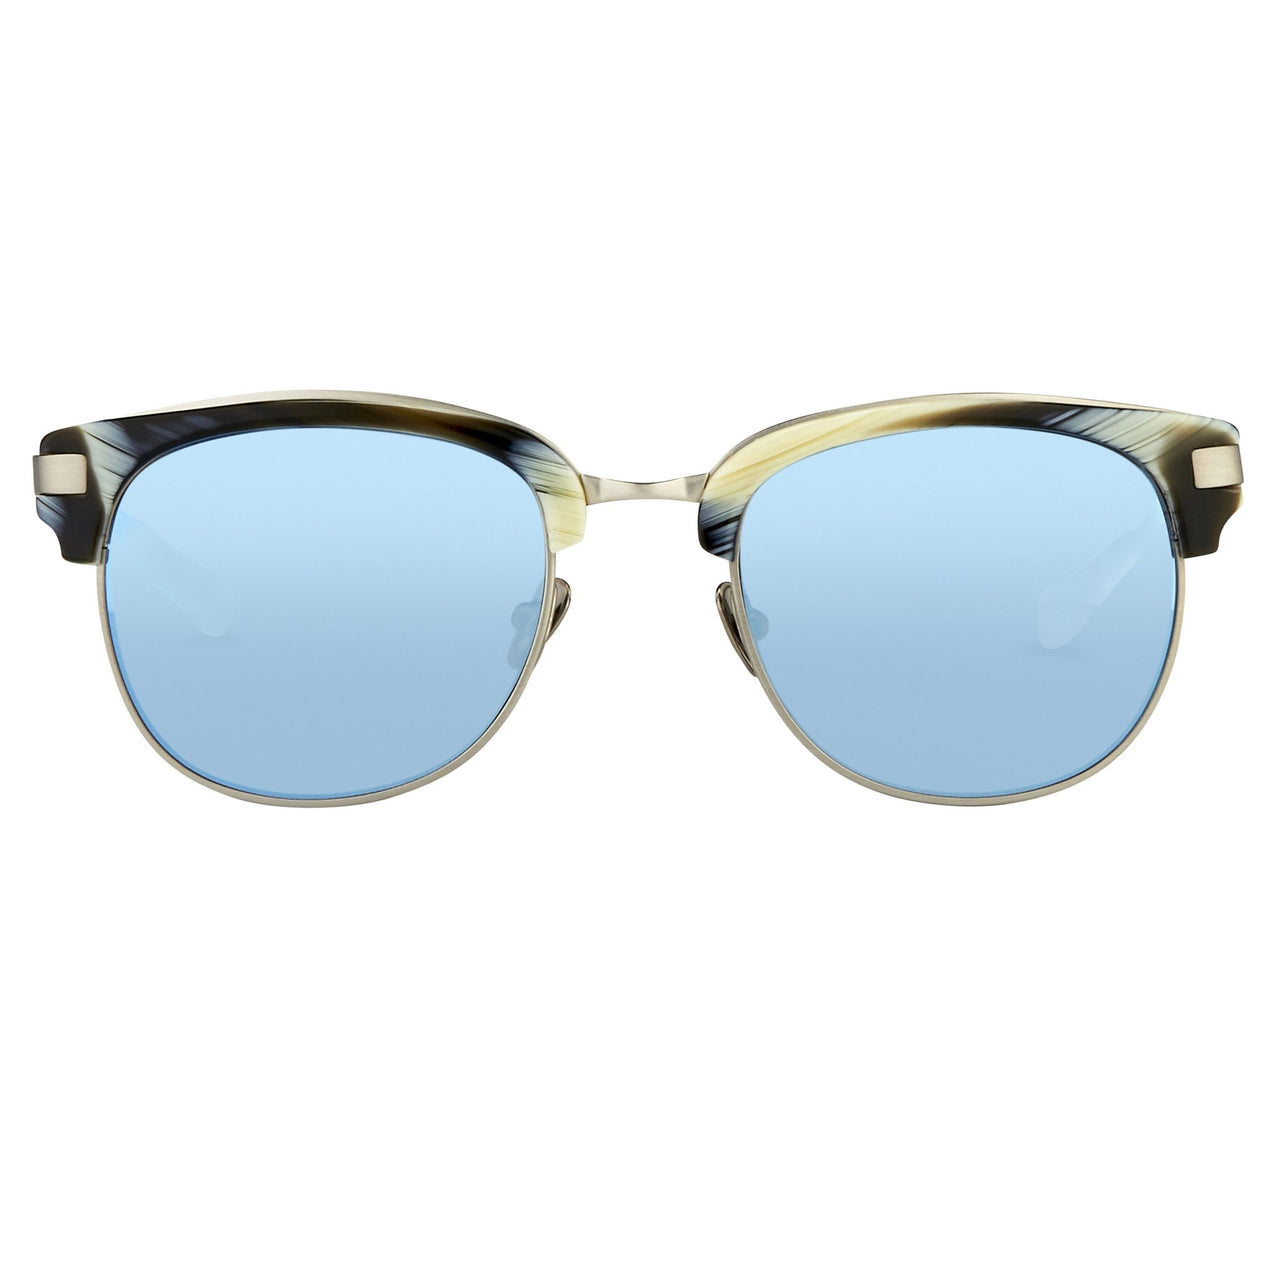 https://www.watchesandcrystals.com/cdn/shop/products/kris-van-assche-sunglasses-with-d-frame-brown-horn-brushed-silver-and-blue-mirror-lenses-category-3-kva76c4sun-608594_1280x.jpg?v=1602761881